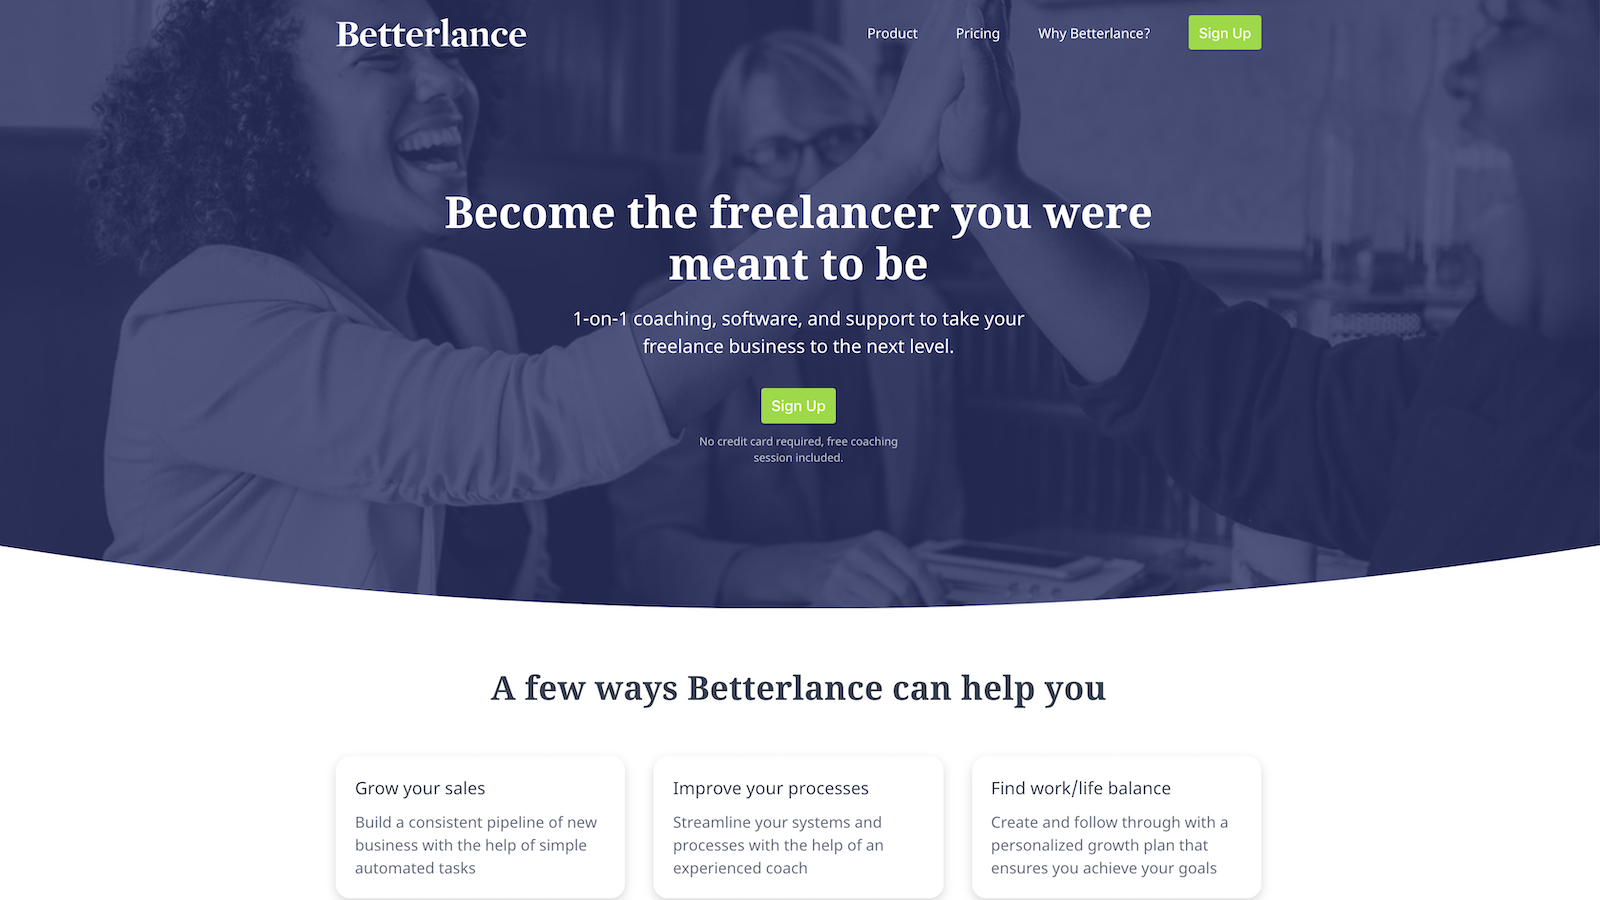 Find detailed information about Betterlance